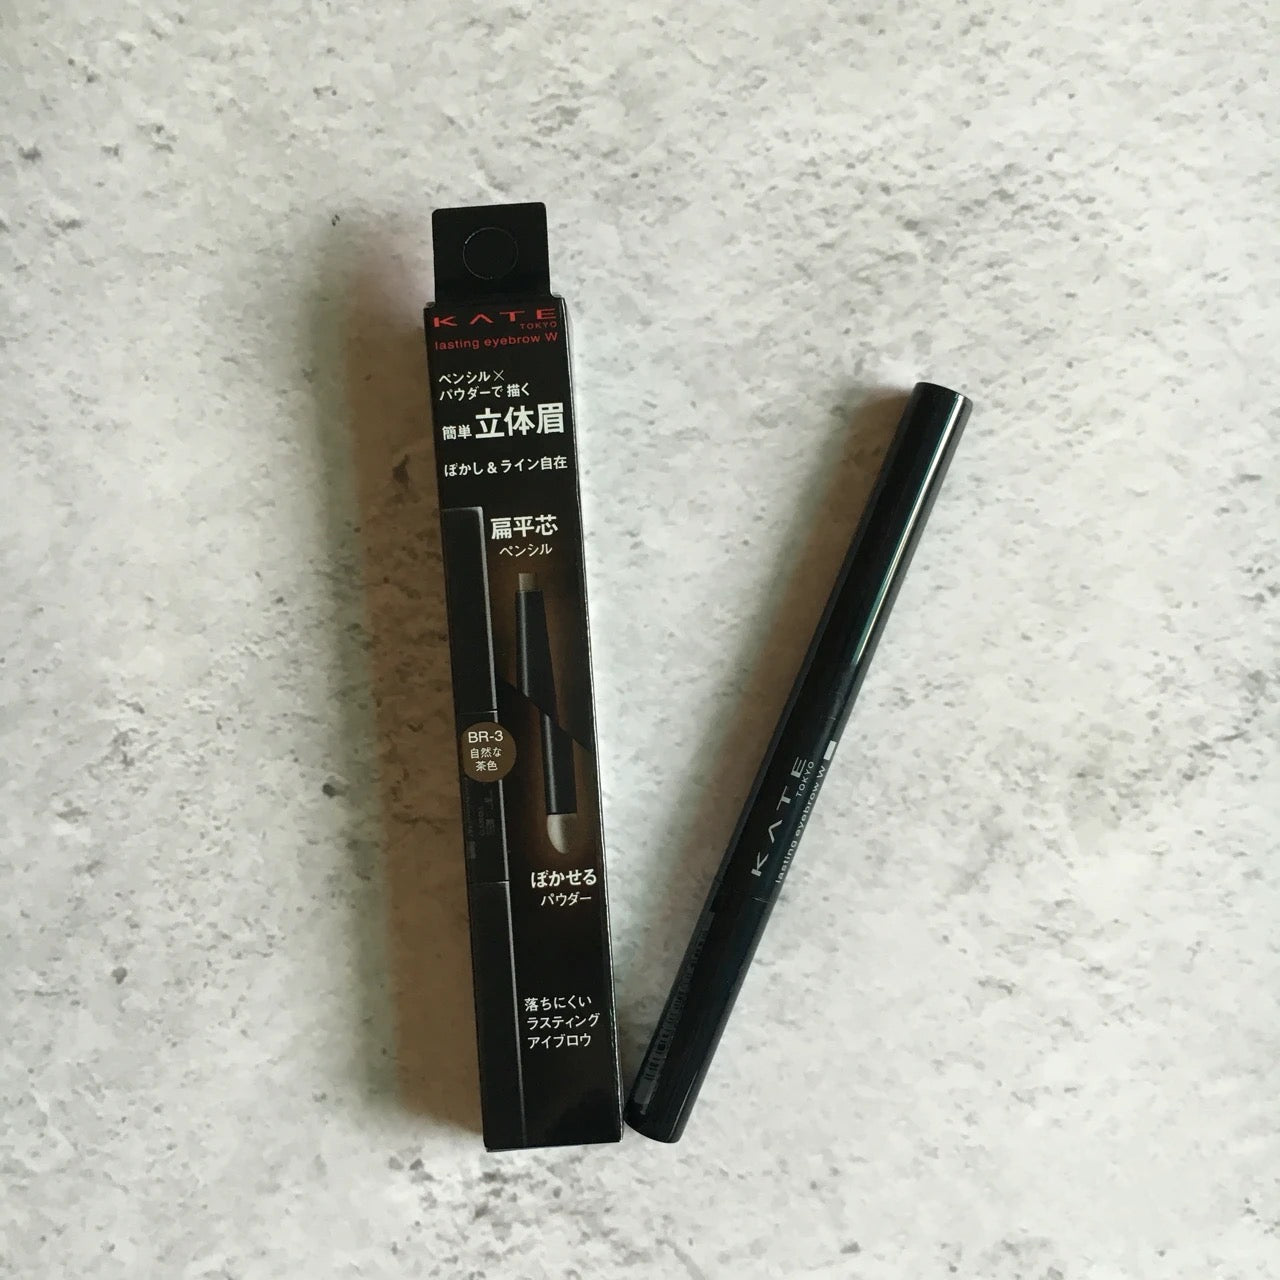 KANEBO KATE Double-ended Lasting Eyebrow Pencil #BR-3 Brown